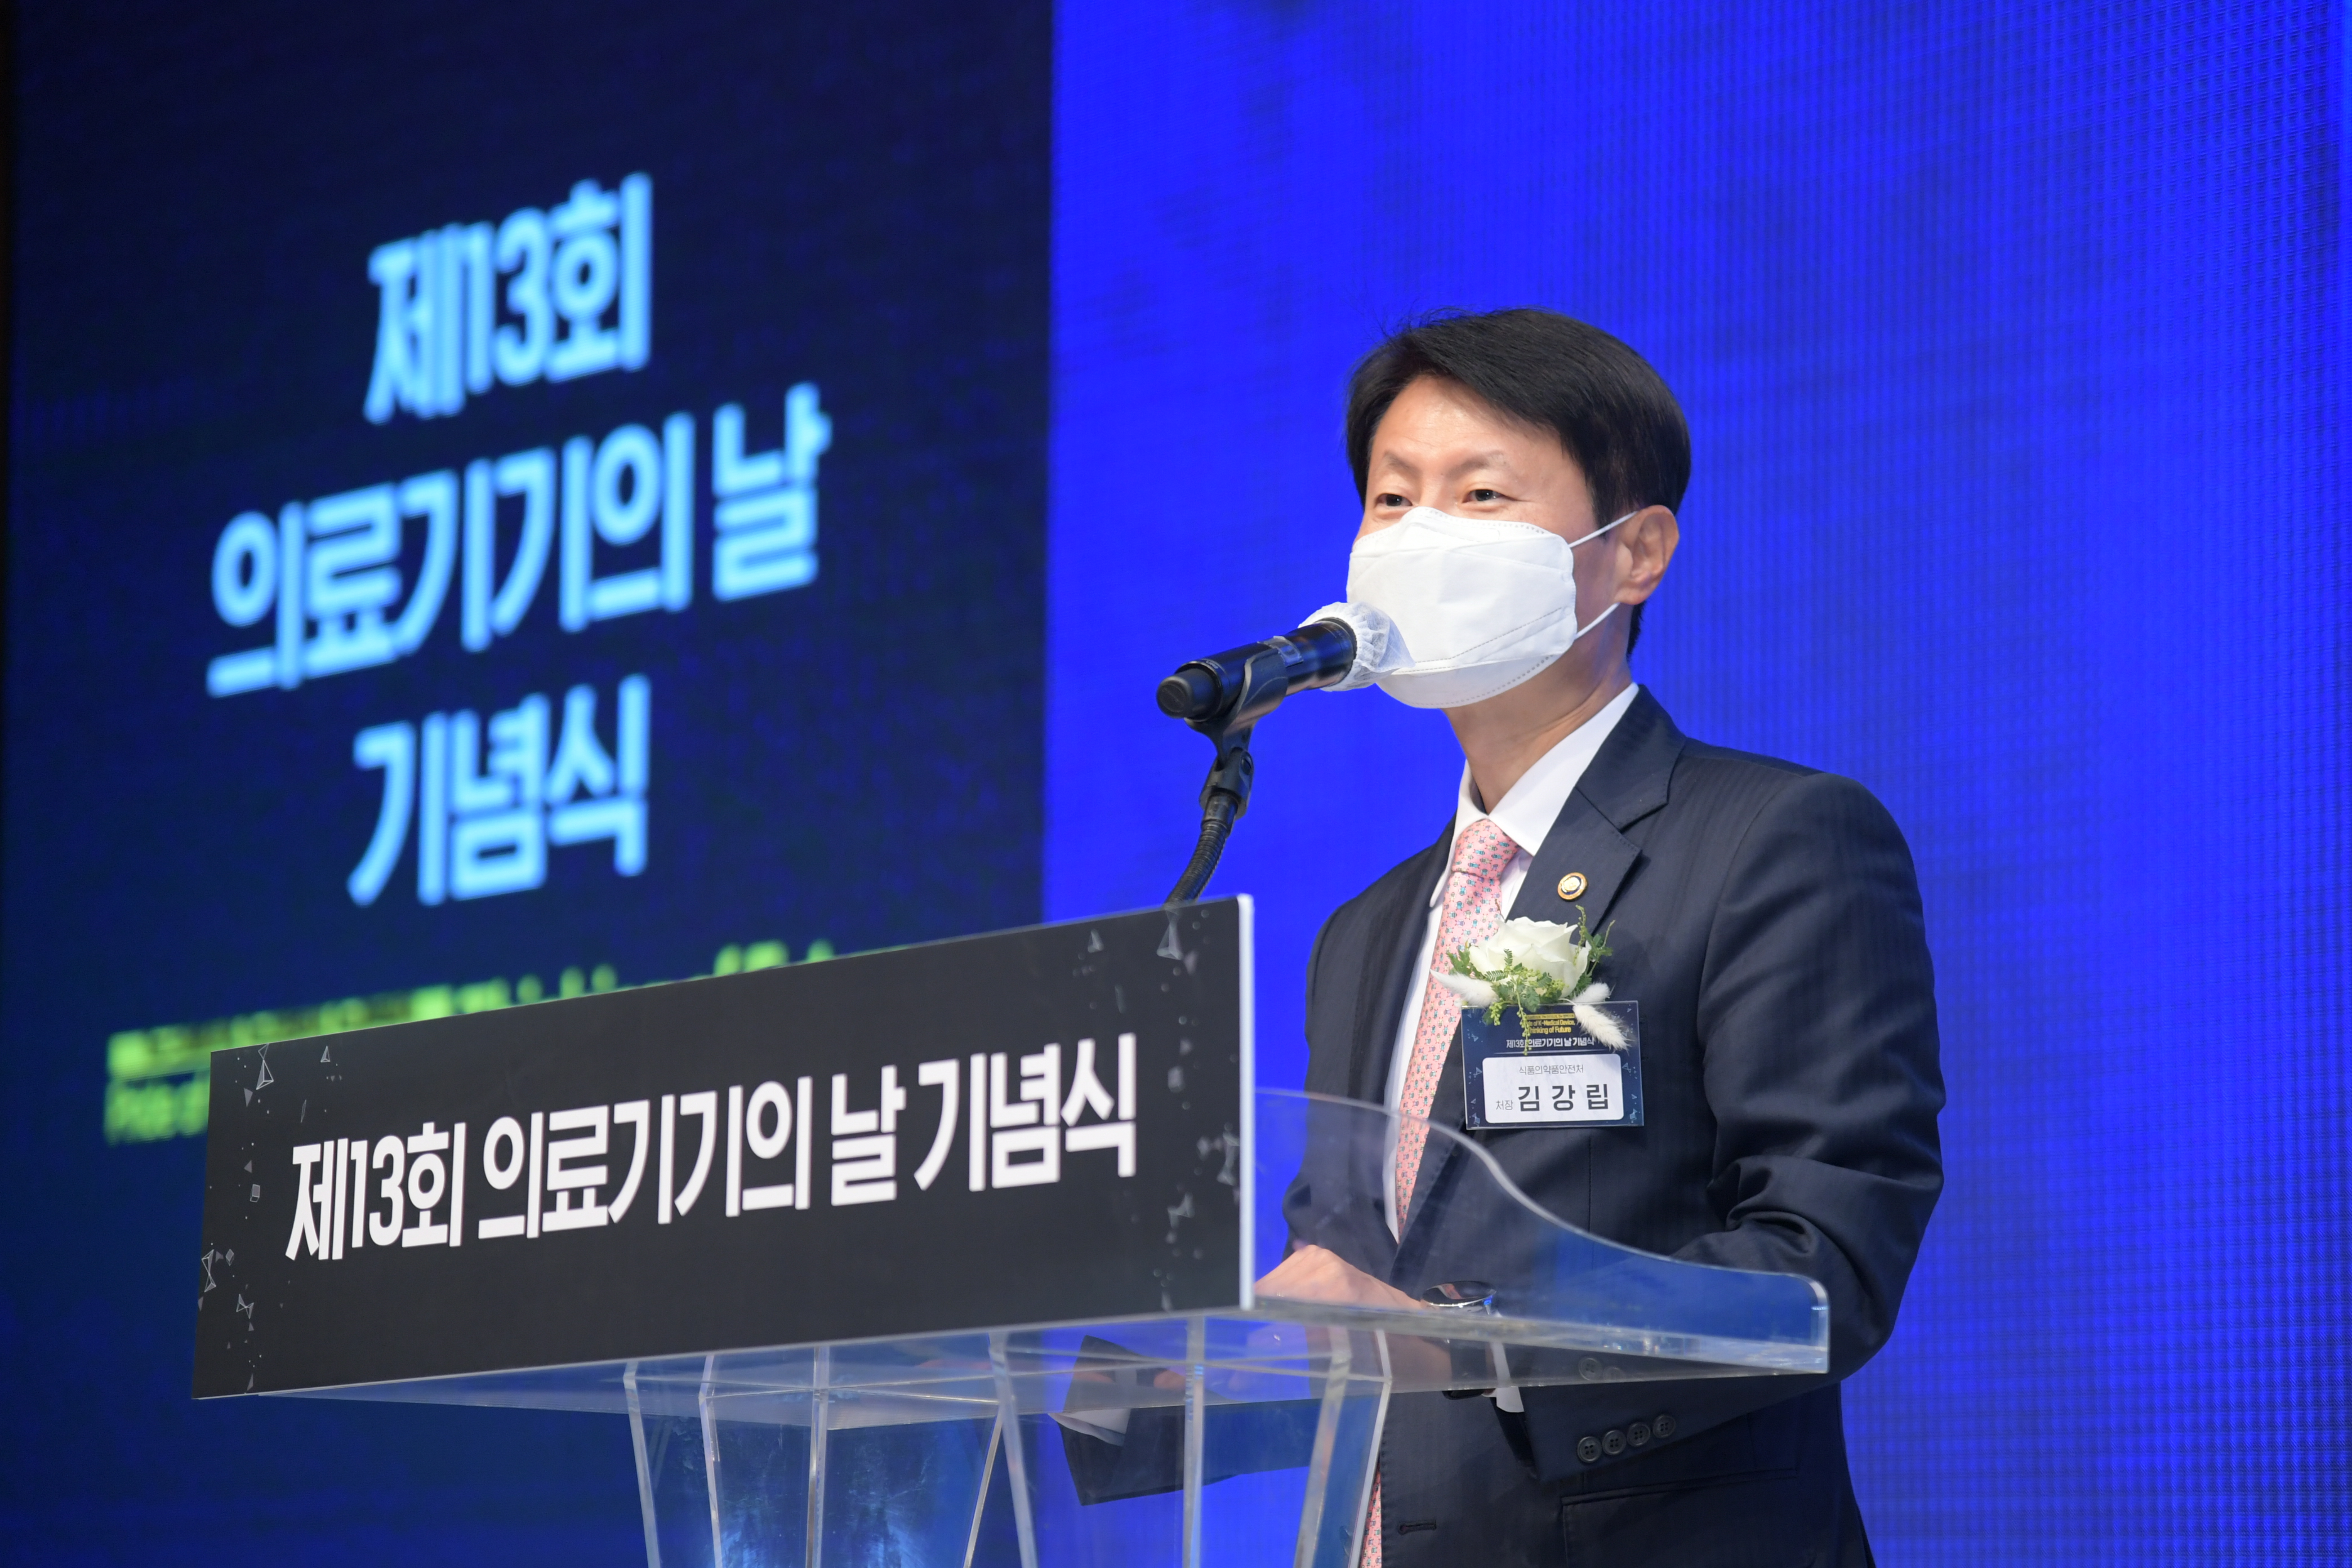 Photo News5 - [Nov. 20, 2020] A Commemorative Ceremony of the 13th Day of Medical Device